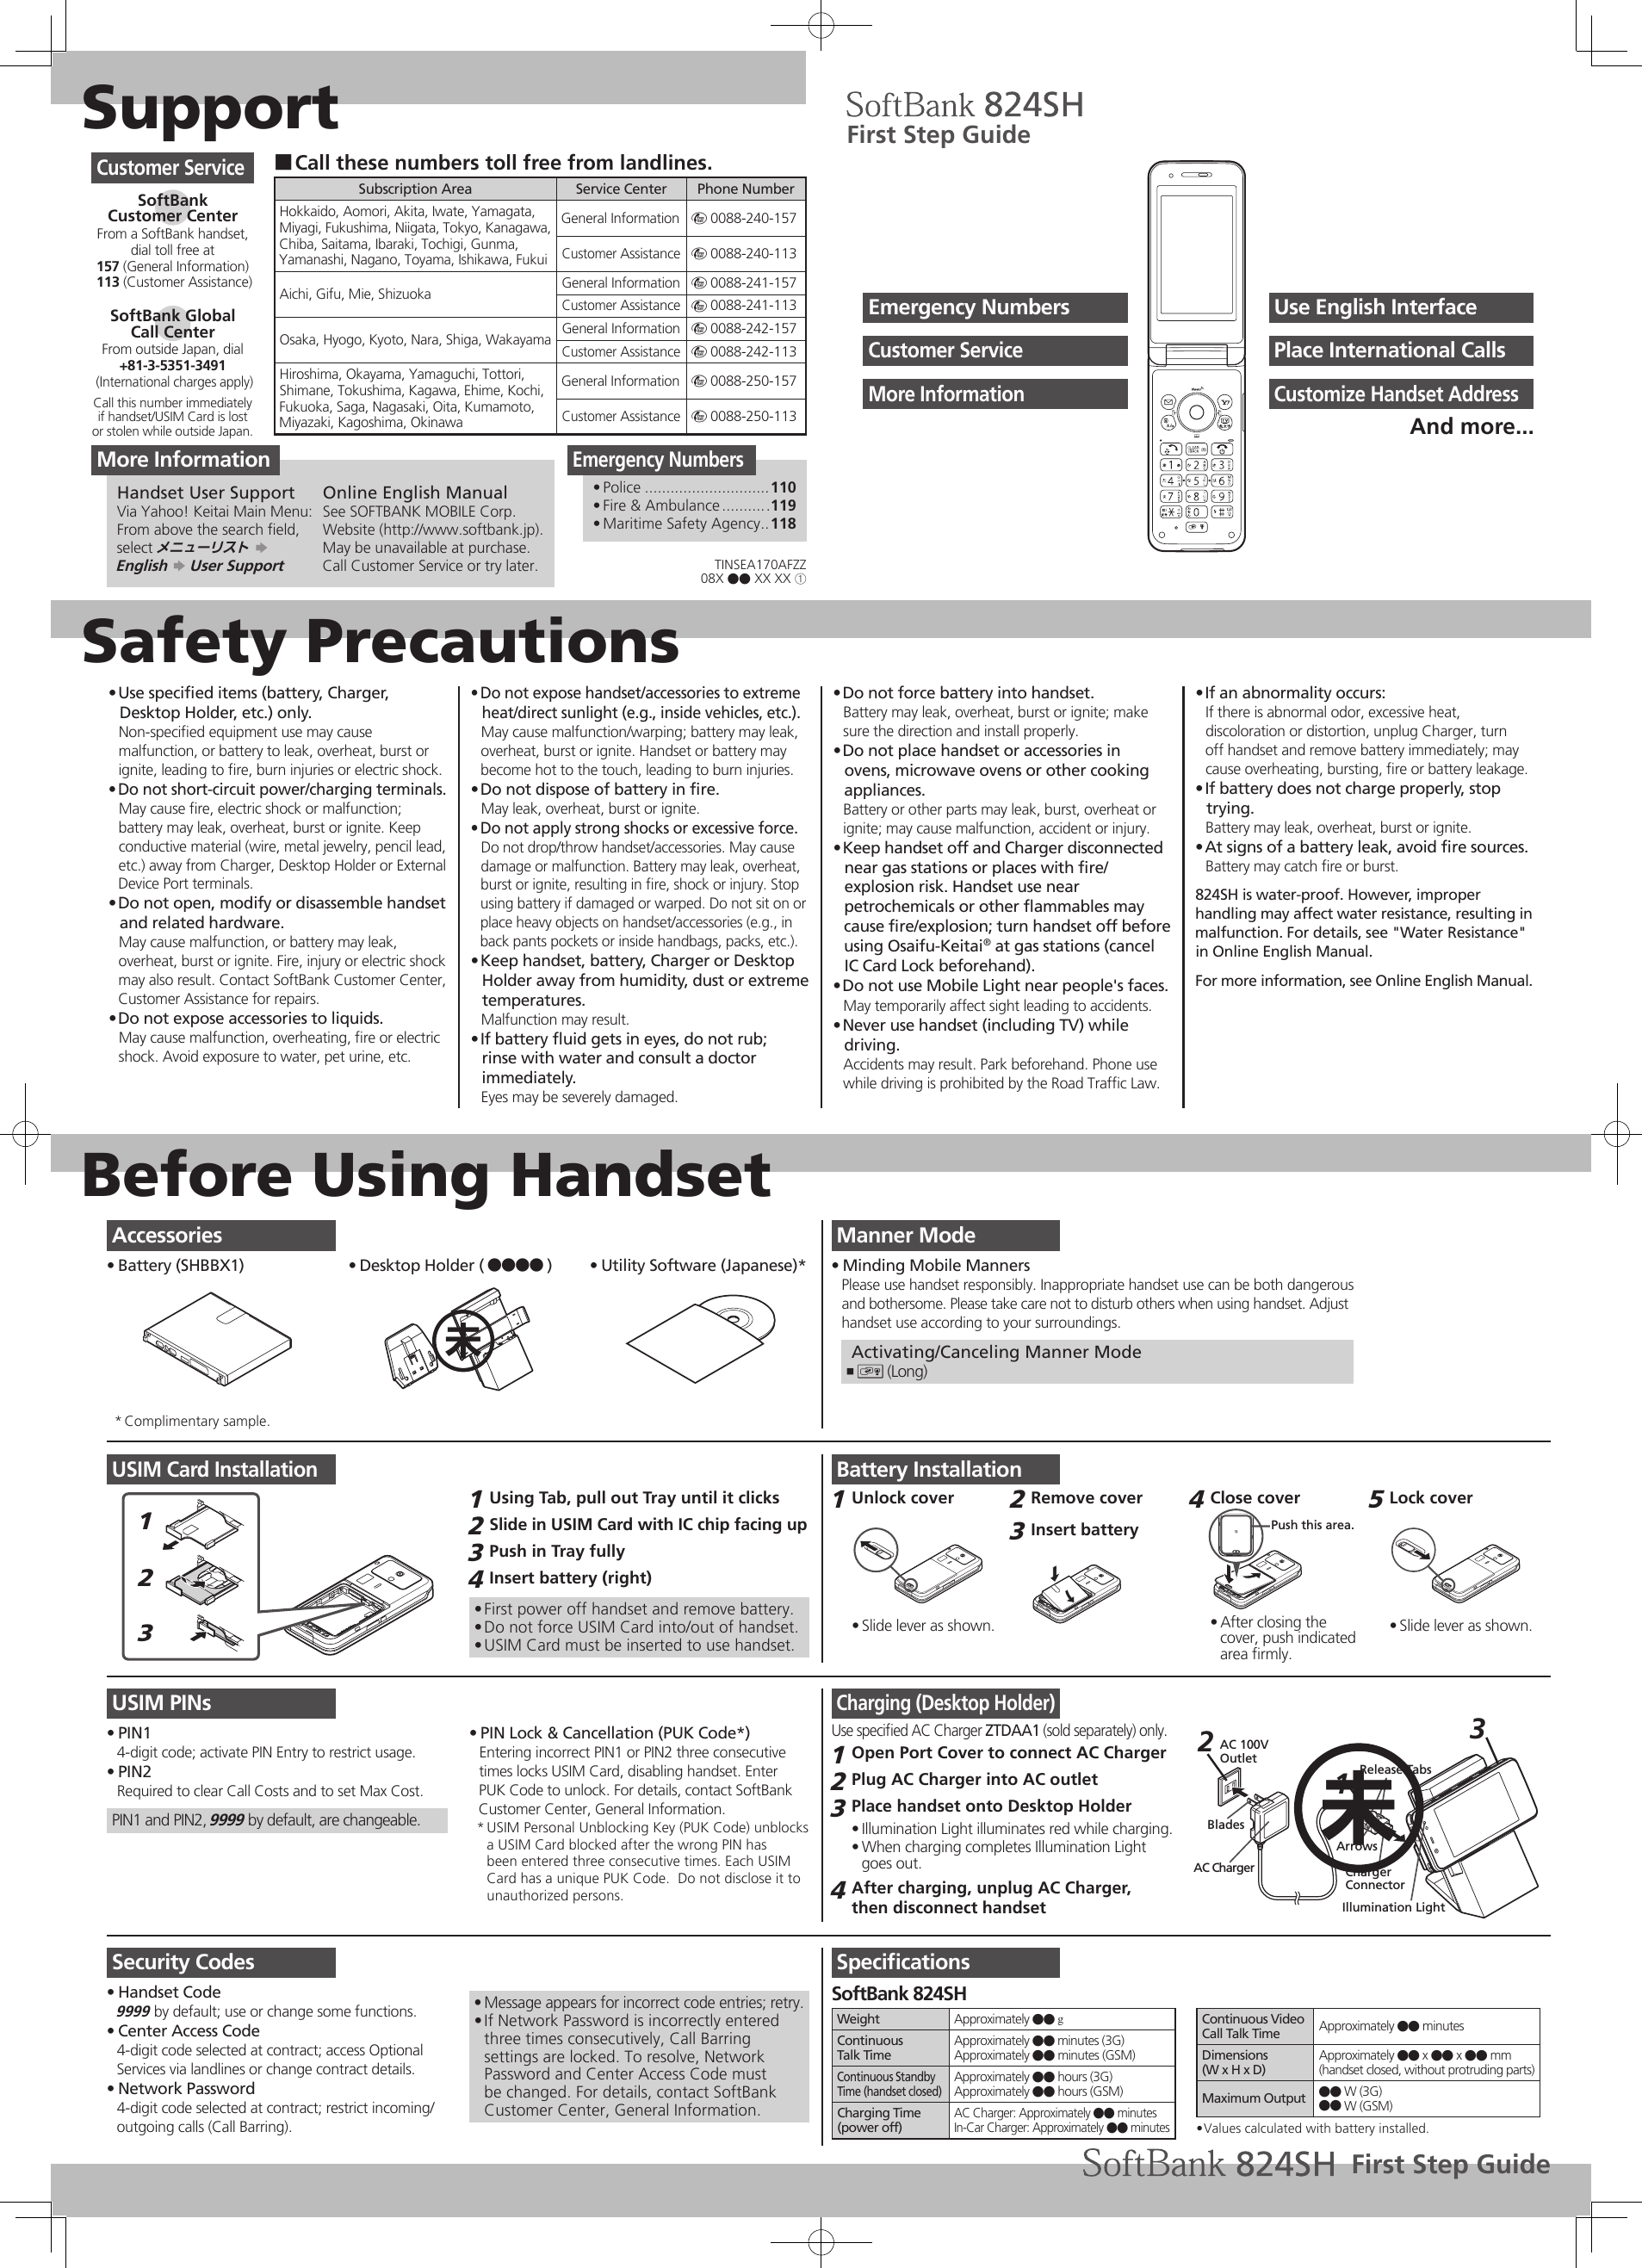 SupportSafety PrecautionsBefore Using HandsetUse speciﬁed items (battery, Charger, • Desktop Holder, etc.) only.Non-speciﬁed equipment use may cause malfunction, or battery to leak, overheat, burst or ignite, leading to ﬁre, burn injuries or electric shock.Do not short-circuit power/charging terminals.• May cause ﬁre, electric shock or malfunction; battery may leak, overheat, burst or ignite. Keep conductive material (wire, metal jewelry, pencil lead, etc.) away from Charger, Desktop Holder or External Device Port terminals.Do not open, modify or disassemble handset • and related hardware.May cause malfunction, or battery may leak, overheat, burst or ignite. Fire, injury or electric shock may also result. Contact SoftBank Customer Center, Customer Assistance for repairs.Do not expose accessories to liquids.• May cause malfunction, overheating, ﬁre or electric shock. Avoid exposure to water, pet urine, etc.Do not expose handset/accessories to extreme • heat/direct sunlight (e.g., inside vehicles, etc.).May cause malfunction/warping; battery may leak, overheat, burst or ignite. Handset or battery may become hot to the touch, leading to burn injuries.Do not dispose of battery in ﬁre.• May leak, overheat, burst or ignite.Do not apply strong shocks or excessive force.• Do not drop/throw handset/accessories. May cause damage or malfunction. Battery may leak, overheat, burst or ignite, resulting in ﬁre, shock or injury. Stop using battery if damaged or warped. Do not sit on or place heavy objects on handset/accessories (e.g., in back pants pockets or inside handbags, packs, etc.).Keep handset, battery, Charger or Desktop • Holder away from humidity, dust or extreme temperatures.Malfunction may result.If battery ﬂuid gets in eyes, do not rub; • rinse with water and consult a doctor immediately.Eyes may be severely damaged.Do not force battery into handset.• Battery may leak, overheat, burst or ignite; make sure the direction and install properly.Do not place handset or accessories in • ovens, microwave ovens or other cooking appliances.Battery or other parts may leak, burst, overheat or ignite; may cause malfunction, accident or injury.Keep handset off and Charger disconnected • near gas stations or places with ﬁre/explosion risk. Handset use near petrochemicals or other ﬂammables may cause ﬁre/explosion; turn handset off before using Osaifu-Keitai® at gas stations (cancel IC Card Lock beforehand).Do not use Mobile Light near people&apos;s faces.• May temporarily affect sight leading to accidents.Never use handset (including TV) while • driving.Accidents may result. Park beforehand. Phone use while driving is prohibited by the Road Trafﬁc Law.If an abnormality occurs:• If there is abnormal odor, excessive heat, discoloration or distortion, unplug Charger, turn off handset and remove battery immediately; may cause overheating, bursting, ﬁre or battery leakage.If battery does not charge properly, stop • trying.Battery may leak, overheat, burst or ignite.At signs of a battery leak, avoid ﬁre sources.• Battery may catch ﬁre or burst.824SH is water-proof. However, improper handling may affect water resistance, resulting in malfunction. For details, see &quot;Water Resistance&quot; in Online English Manual.For more information, see Online English Manual.Manner ModeMinding Mobile Manners• Please use handset responsibly. Inappropriate handset use can be both dangerousand bothersome. Please take care not to disturb others when using handset. Adjusthandset use according to your surroundings. Activating/Canceling Manner Mode) ,  (Long)USIM Card Installation123Using Tab, pull out Tray until it clicks1 Slide in USIM Card with IC chip facing up2 Push in Tray fully3 Insert battery (right)4 First power off handset and remove battery.• Do not force USIM Card into/out of handset.• USIM Card must be inserted to use handset.• USIM PINsPIN1• 4-digit code; activate PIN Entry to restrict usage.PIN2• Required to clear Call Costs and to set Max Cost.PIN1 and PIN2, 9999 by default, are changeable.PIN Lock &amp; Cancellation (PUK Code*)• Entering incorrect PIN1 or PIN2 three consecutivetimes locks USIM Card, disabling handset. EnterPUK Code to unlock. For details, contact SoftBank Customer Center, General Information.USIM Personal Unblocking Key (PUK Code) unblocks * a USIM Card blocked after the wrong PIN has been entered three consecutive times. Each USIM Card has a unique PUK Code.  Do not disclose it to unauthorized persons.Security CodesHandset Code• 9999 by default; use or change some functions.Center Access Code• 4-digit code selected at contract; access Optional Services via landlines or change contract details.Network Password• 4-digit code selected at contract; restrict incoming/outgoing calls (Call Barring).Message appears for incorrect code entries; retry.• If Network Password is incorrectly entered • three times consecutively, Call Barring settings are locked. To resolve, Network Password and Center Access Code must be changed. For details, contact SoftBank Customer Center, General Information.Battery InstallationUnlock cover1 Slide lever as shown.• Remove cover2 Insert battery3 Close cover4 Push this area.After closing the • cover, push indicated area ﬁrmly.Lock cover5 Slide lever as shown.• Charging (Desktop Holder)Use speciﬁed AC Charger ZTDAA1 (sold separately) only.Open Port Cover to connect AC Charger1 Plug AC Charger into AC outlet2 Place handset onto Desktop Holder3 Illumination Light illuminates red while charging.• When charging completes Illumination Light • goes out.After charging, unplug AC Charger, 4 then disconnect handsetAC 100VOutletBladesAC ChargerRelease TabsCharger ConnectorArrows21Illumination Light3SpeciﬁcationsSoftBank 824SHWeight Approximately ●● gContinuousTalk TimeApproximately ●● minutes (3G)Approximately ●● minutes (GSM)Continuous Standby Time (handset closed)Approximately ●● hours (3G)Approximately ●● hours (GSM)Charging Time(power off)AC Charger: Approximately ●● minutesIn-Car Charger: Approximately ●● minutesContinuous Video Call Talk Time Approximately ●● minutesDimensions(W x H x D)Approximately ●● x ●● x ●● mm(handset closed, without protruding parts)Maximum Output ●● W (3G)●● W (GSM)Values calculated with battery installed.• Call these numbers toll free from landlines. ■Subscription Area Service Center Phone NumberHokkaido, Aomori, Akita, Iwate, Yamagata, Miyagi, Fukushima, Niigata, Tokyo, Kanagawa, Chiba, Saitama, Ibaraki, Tochigi, Gunma, Yamanashi, Nagano, Toyama, Ishikawa, FukuiGeneral Information m 0088-240-157Customer Assistance m 0088-240-113Aichi, Gifu, Mie, Shizuoka General Information m 0088-241-157Customer Assistance m 0088-241-113Osaka, Hyogo, Kyoto, Nara, Shiga, Wakayama General Information m 0088-242-157Customer Assistance m 0088-242-113Hiroshima, Okayama, Yamaguchi, Tottori, Shimane, Tokushima, Kagawa, Ehime, Kochi, Fukuoka, Saga, Nagasaki, Oita, Kumamoto, Miyazaki, Kagoshima, OkinawaGeneral Information m 0088-250-157Customer Assistance m 0088-250-113Customer ServiceSoftBank  Customer CenterFrom a SoftBank handset, dial toll free at157 (General Information) 113 (Customer Assistance)SoftBank Global  Call CenterFrom outside Japan, dial+81-3-5351-3491 (International charges apply)Call this number immediatelyif handset/USIM Card is lostor stolen while outside Japan.Emergency NumbersPolice•   .............................110Fire &amp; Ambulance•   ...........119Maritime Safety Agency•   ..118First Step GuideUse English InterfaceEmergency NumbersPlace International CallsCustomer ServiceCustomize Handset AddressMore InformationAnd more...AccessoriesBattery (SHBBX1)•  Desktop Holder ( ●●●● )•  Utility Software (Japanese)*• Complimentary sample.* More InformationHandset User SupportVia Yahoo! Keitai Main Menu:From above the search ﬁeld, select メニューリスト S  English S User SupportOnline English ManualSee SOFTBANK MOBILE Corp. Website (http://www.softbank.jp).May be unavailable at purchase. Call Customer Service or try later.未TINSEA170AFZZ08X ●● XX XX ①First Step Guide未